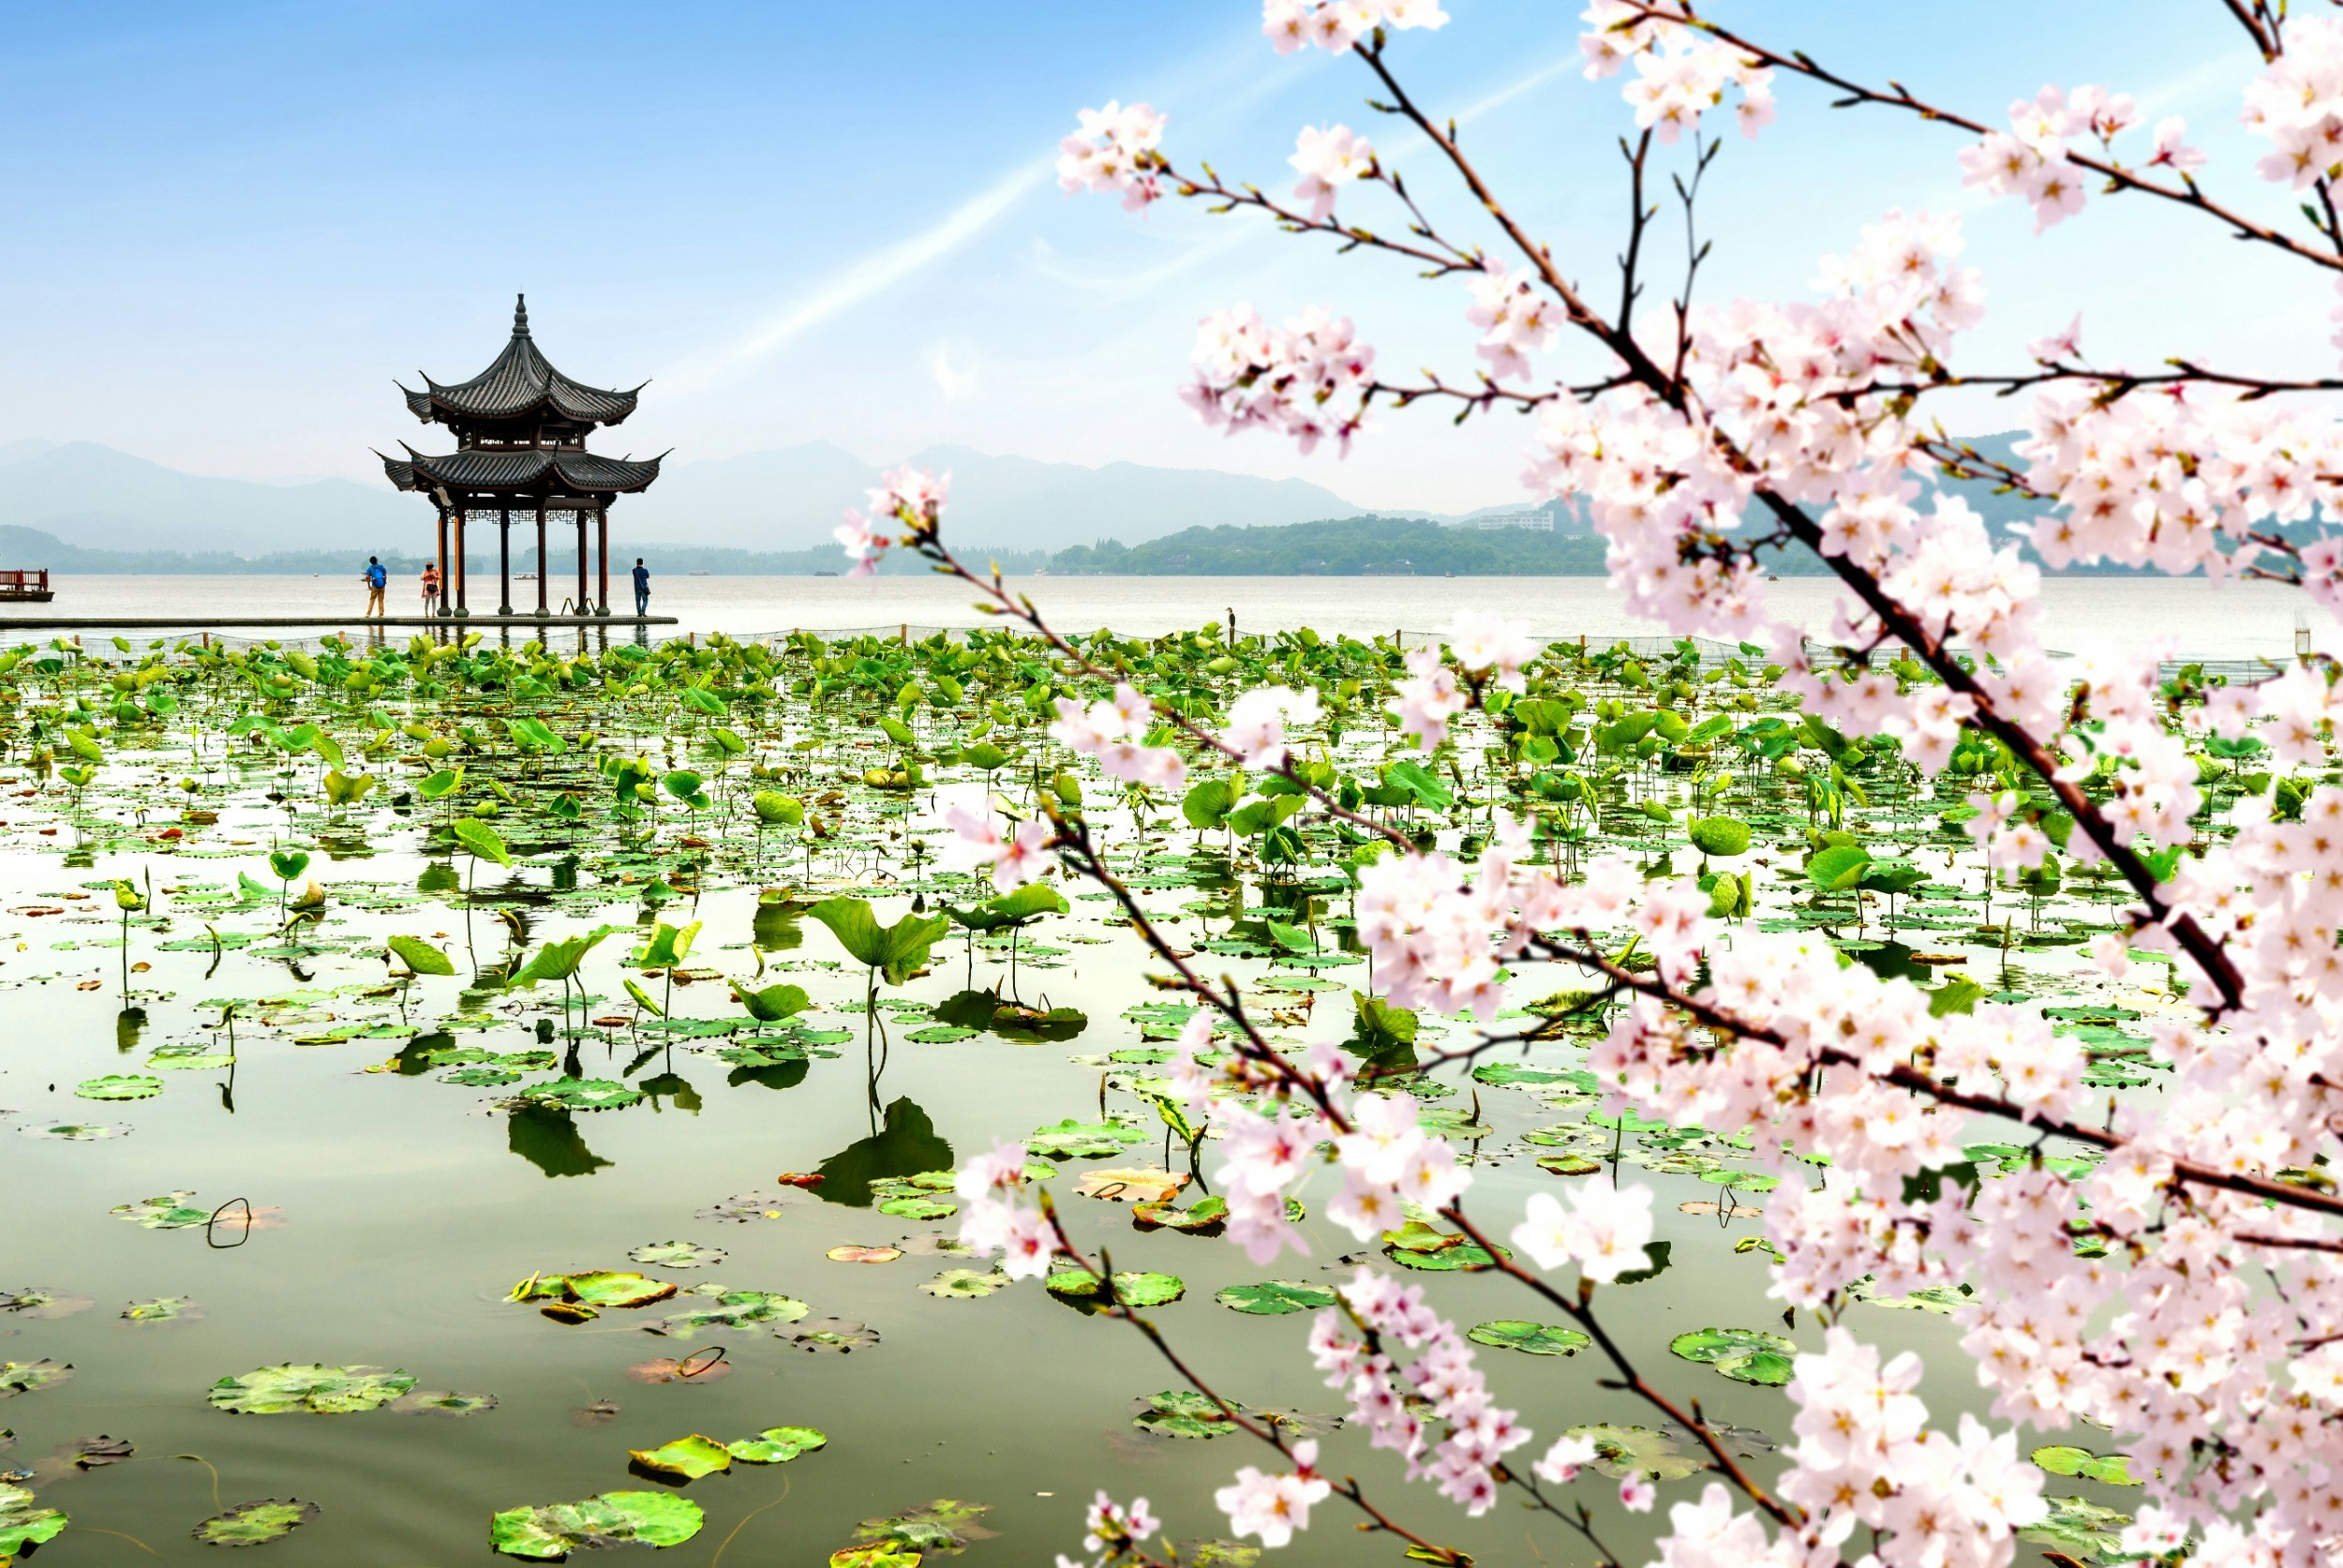 West Lake in China with cherry blossoms